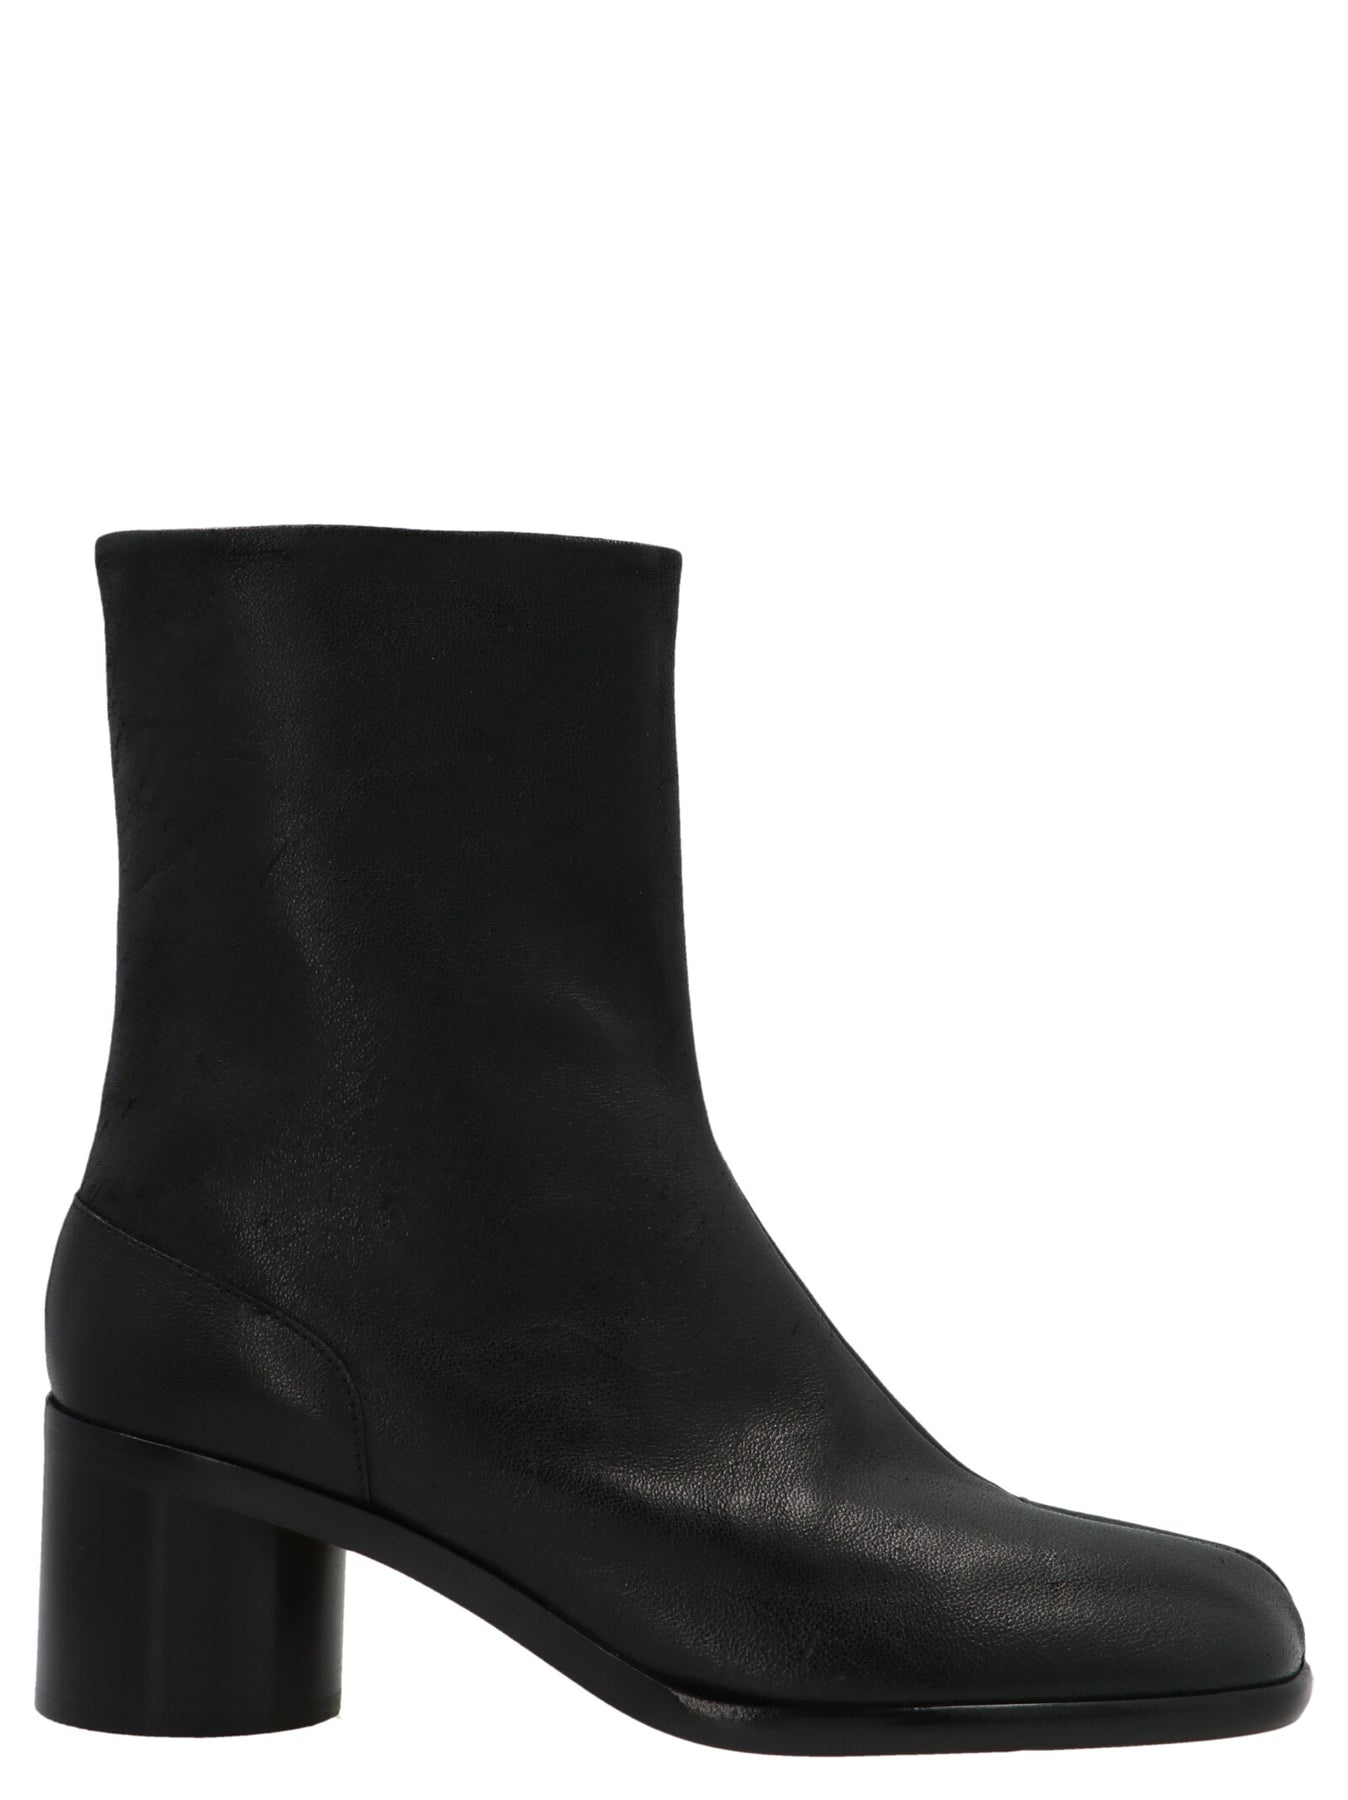 'Tabi' ankle boots - 1